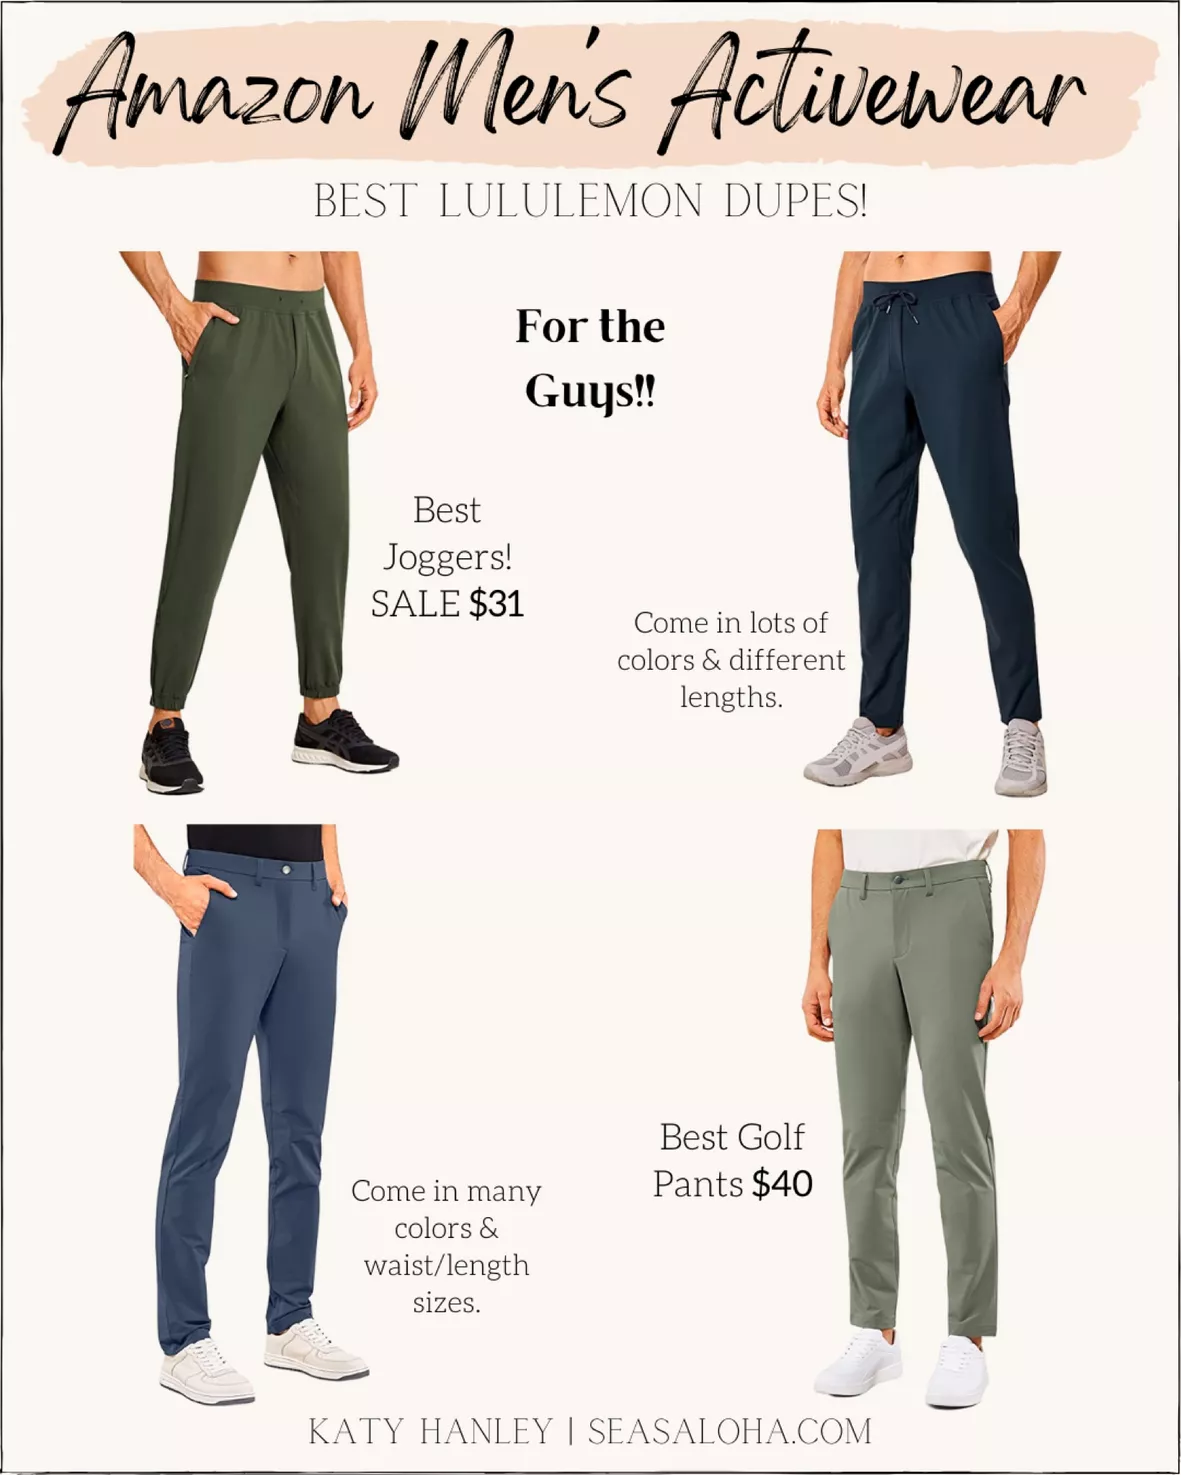 Replying to @cherylcox143 MENS LULU DU*PE FROM  12/10 finds wort,  Lululemon Dupes